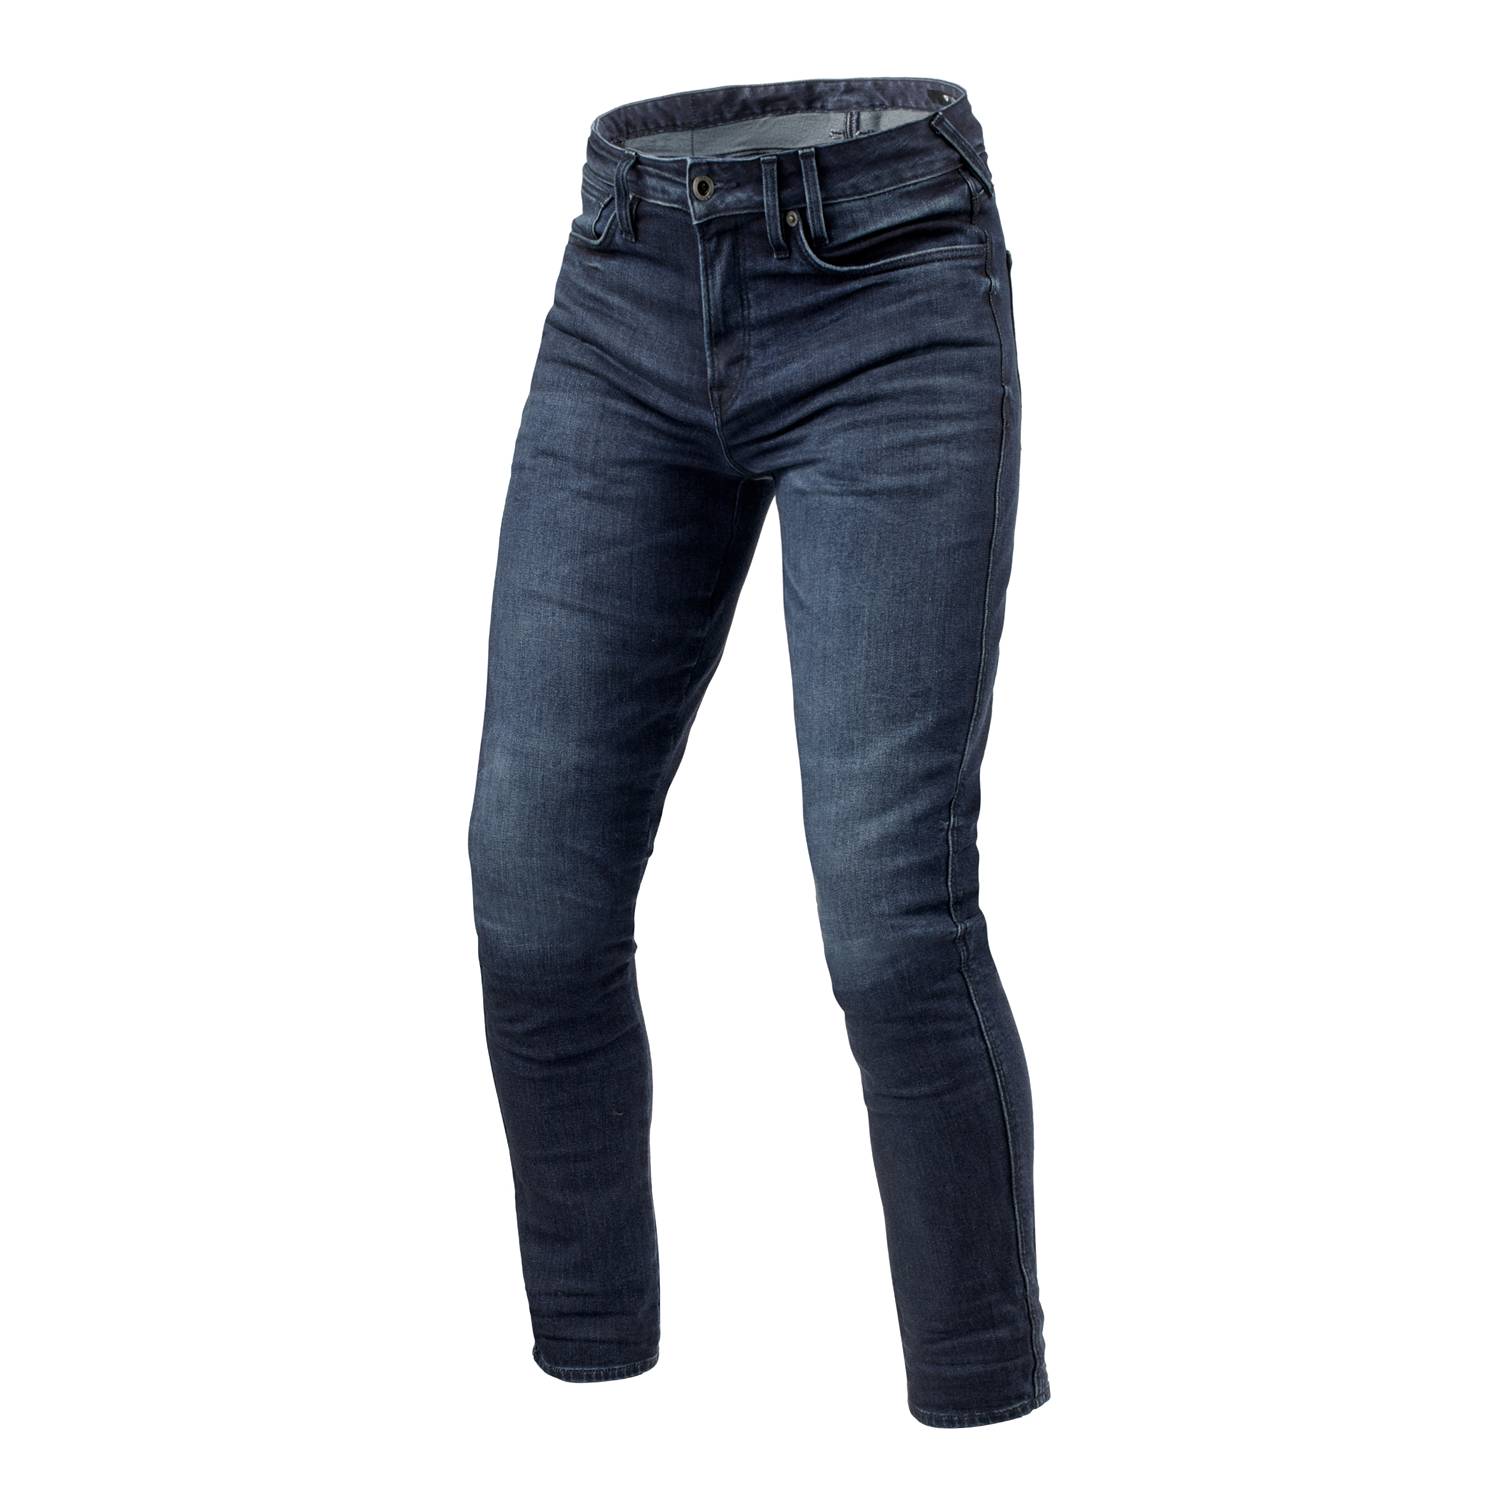 Image of REV'IT! Jeans Carlin SK Dark Blue Used L34 Motorcycle Jeans Taille L34/W30